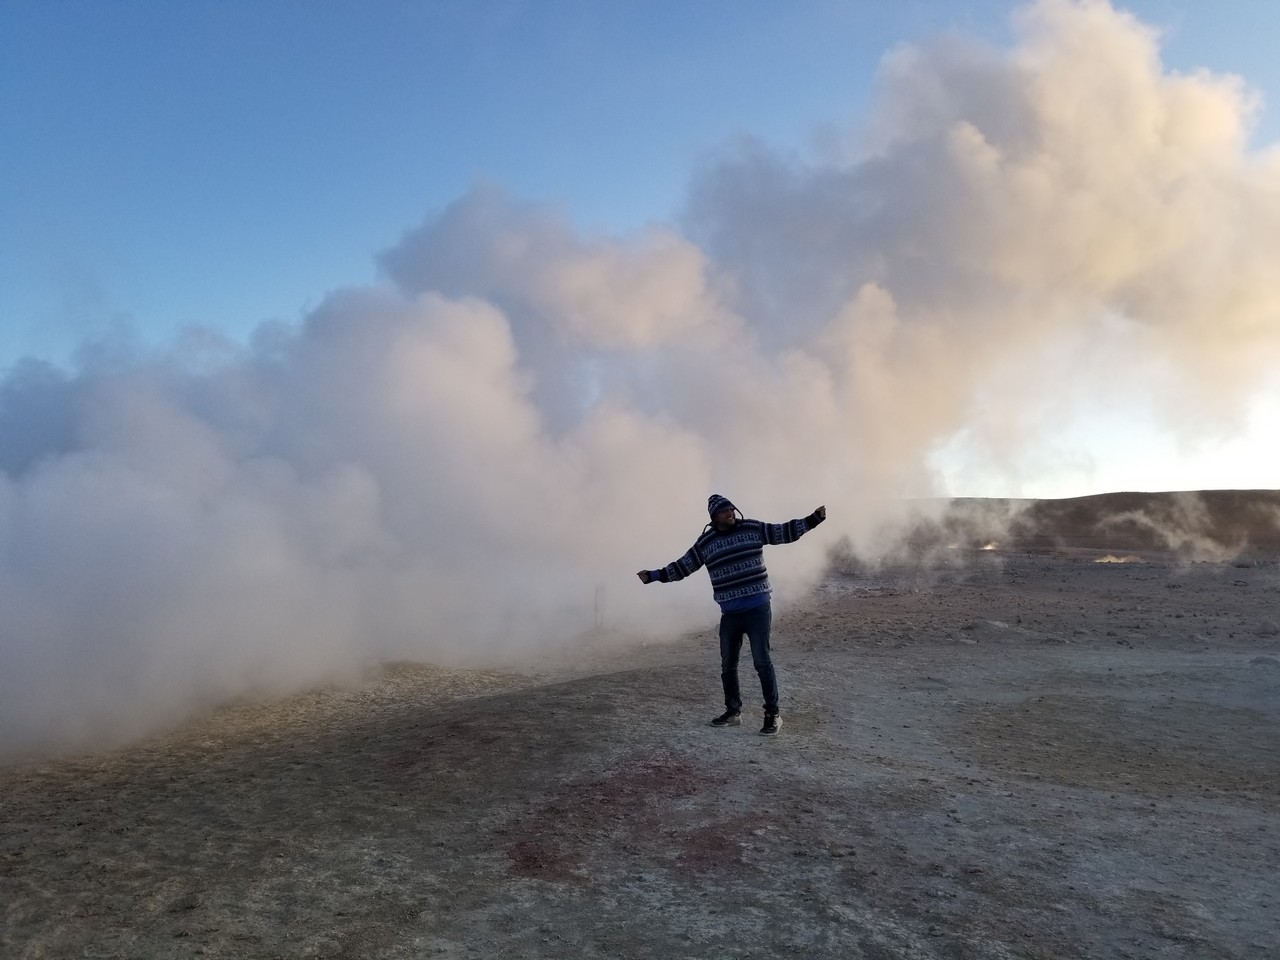 a person standing in a dirt area with smoke coming out of it